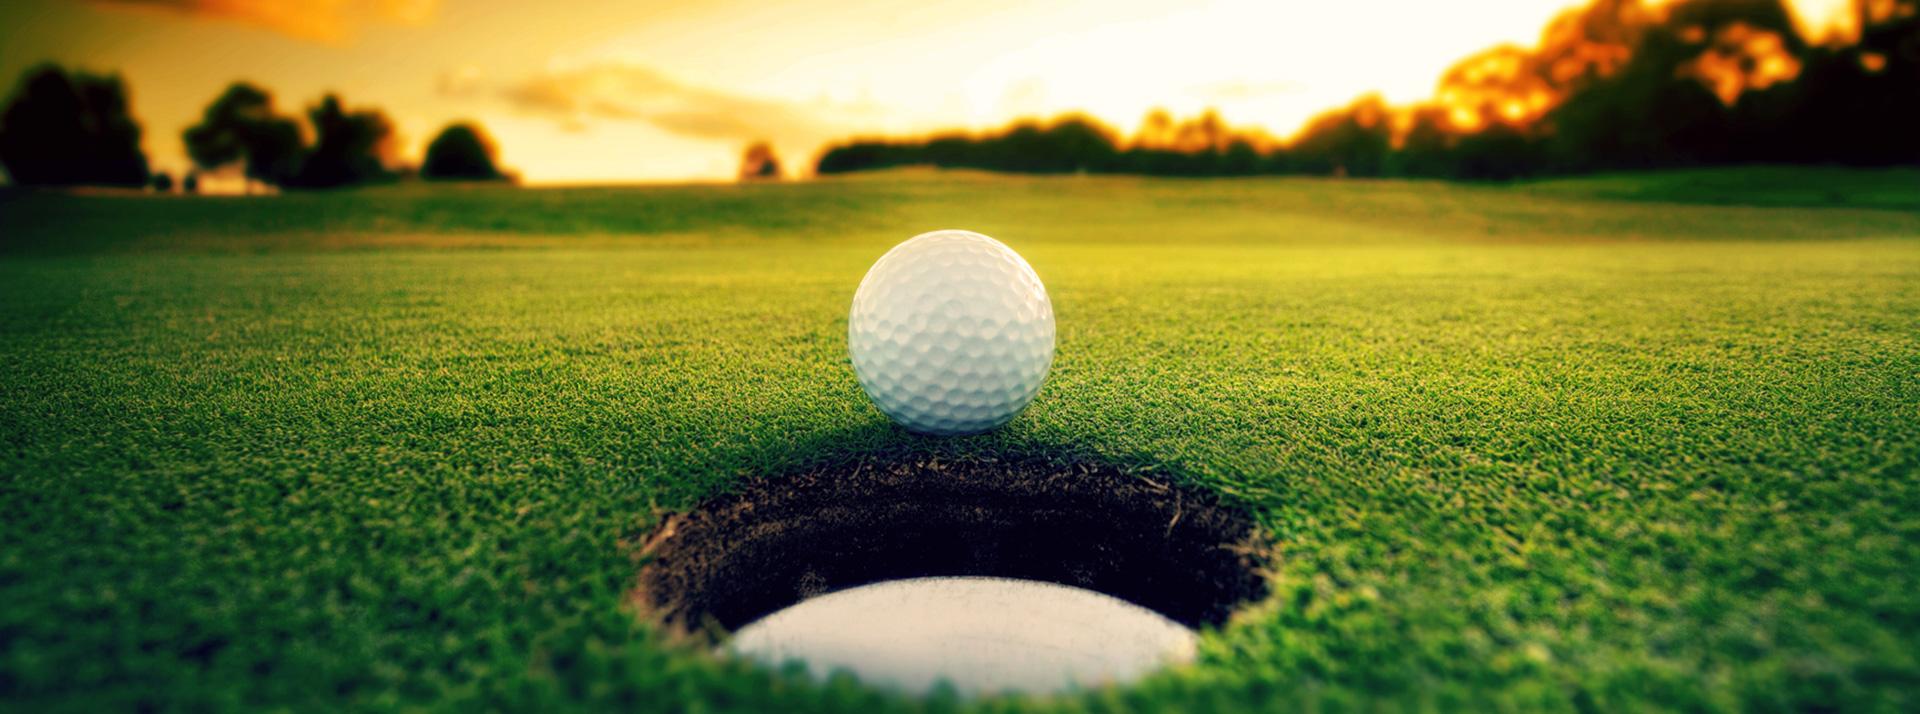 Golf ball in front of golf hole